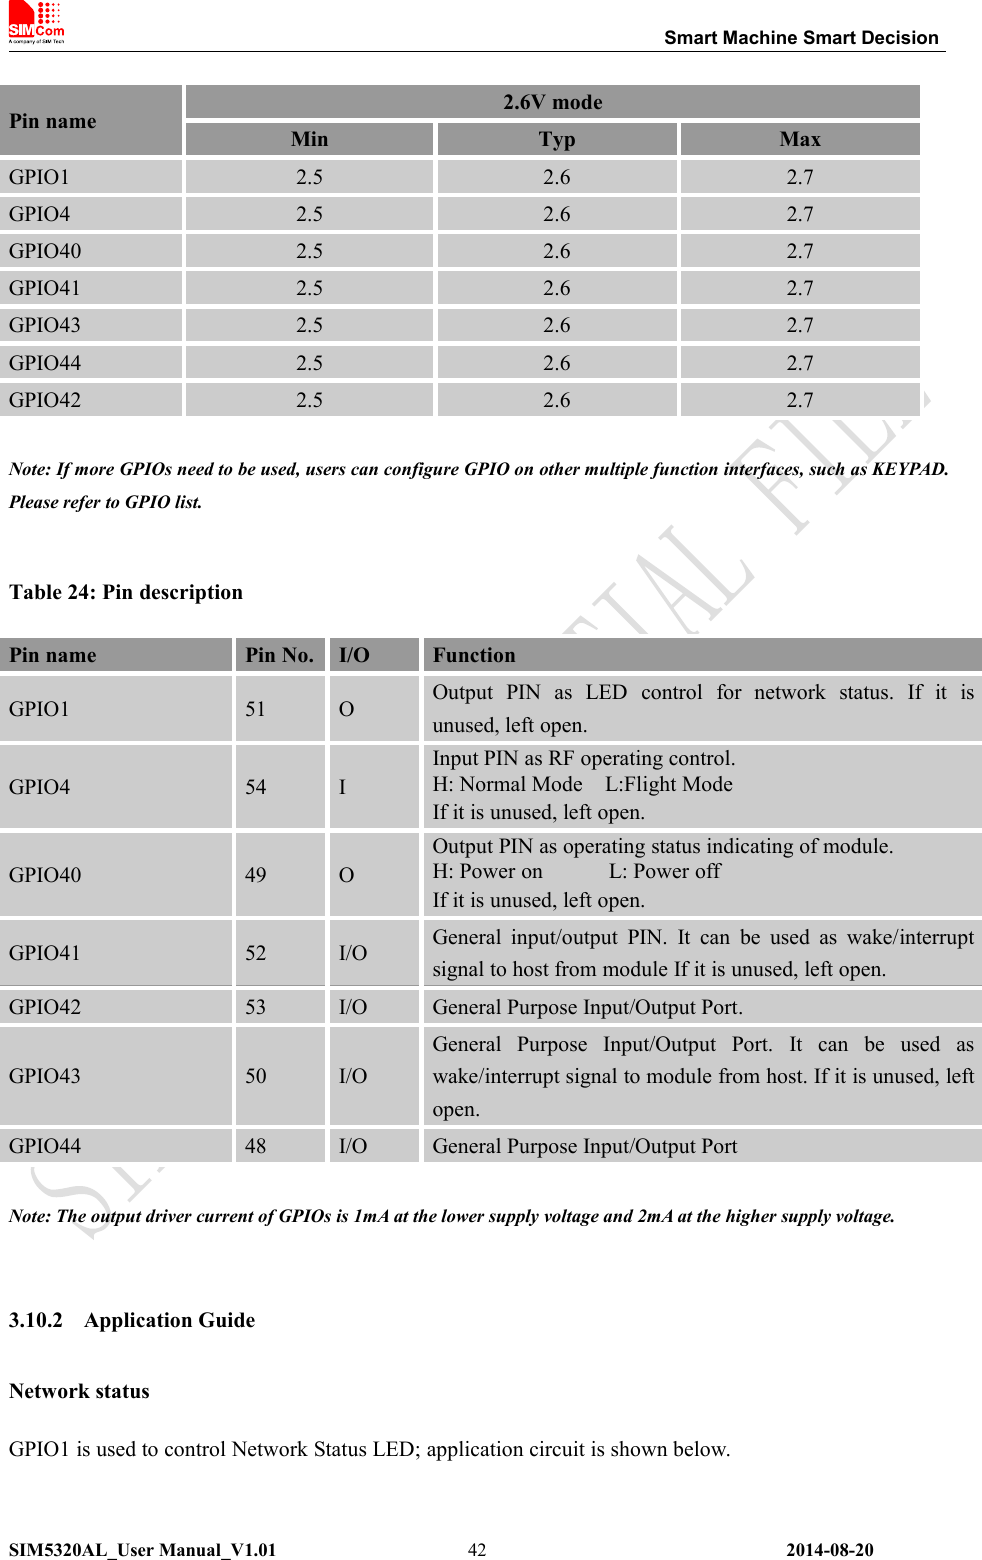 Smart Machine Smart DecisionSIM5320AL_User Manual_V1.01 2014-08-2042Note: If more GPIOs need to be used, users can configure GPIO on other multiple function interfaces, such as KEYPAD.Please refer to GPIO list.Table 24: Pin descriptionNote: The output driver current of GPIOs is 1mA at the lower supply voltage and 2mA at the higher supply voltage.3.10.2 Application GuideNetwork statusGPIO1 is used to control Network Status LED; application circuit is shown below.Pin name 2.6V modeMin Typ MaxGPIO1 2.5 2.6 2.7GPIO4 2.5 2.6 2.7GPIO40 2.5 2.6 2.7GPIO41 2.5 2.6 2.7GPIO43 2.5 2.6 2.7GPIO44 2.5 2.6 2.7GPIO42 2.5 2.6 2.7Pin name Pin No. I/O FunctionGPIO1 51 O Output PIN as LED control for network status. If it isunused, left open.GPIO4 54 IInput PIN as RF operating control.H: Normal Mode L:Flight ModeIf it is unused, left open.GPIO40 49 OOutput PIN as operating status indicating of module.H: Power on L: Power offIf it is unused, left open.GPIO41 52 I/O General input/output PIN. It can be used as wake/interruptsignal to host from module If it is unused, left open.GPIO42 53 I/O General Purpose Input/Output Port.GPIO43 50 I/OGeneral Purpose Input/Output Port. It can be used aswake/interrupt signal to module from host. If it is unused, leftopen.GPIO44 48 I/O General Purpose Input/Output Port